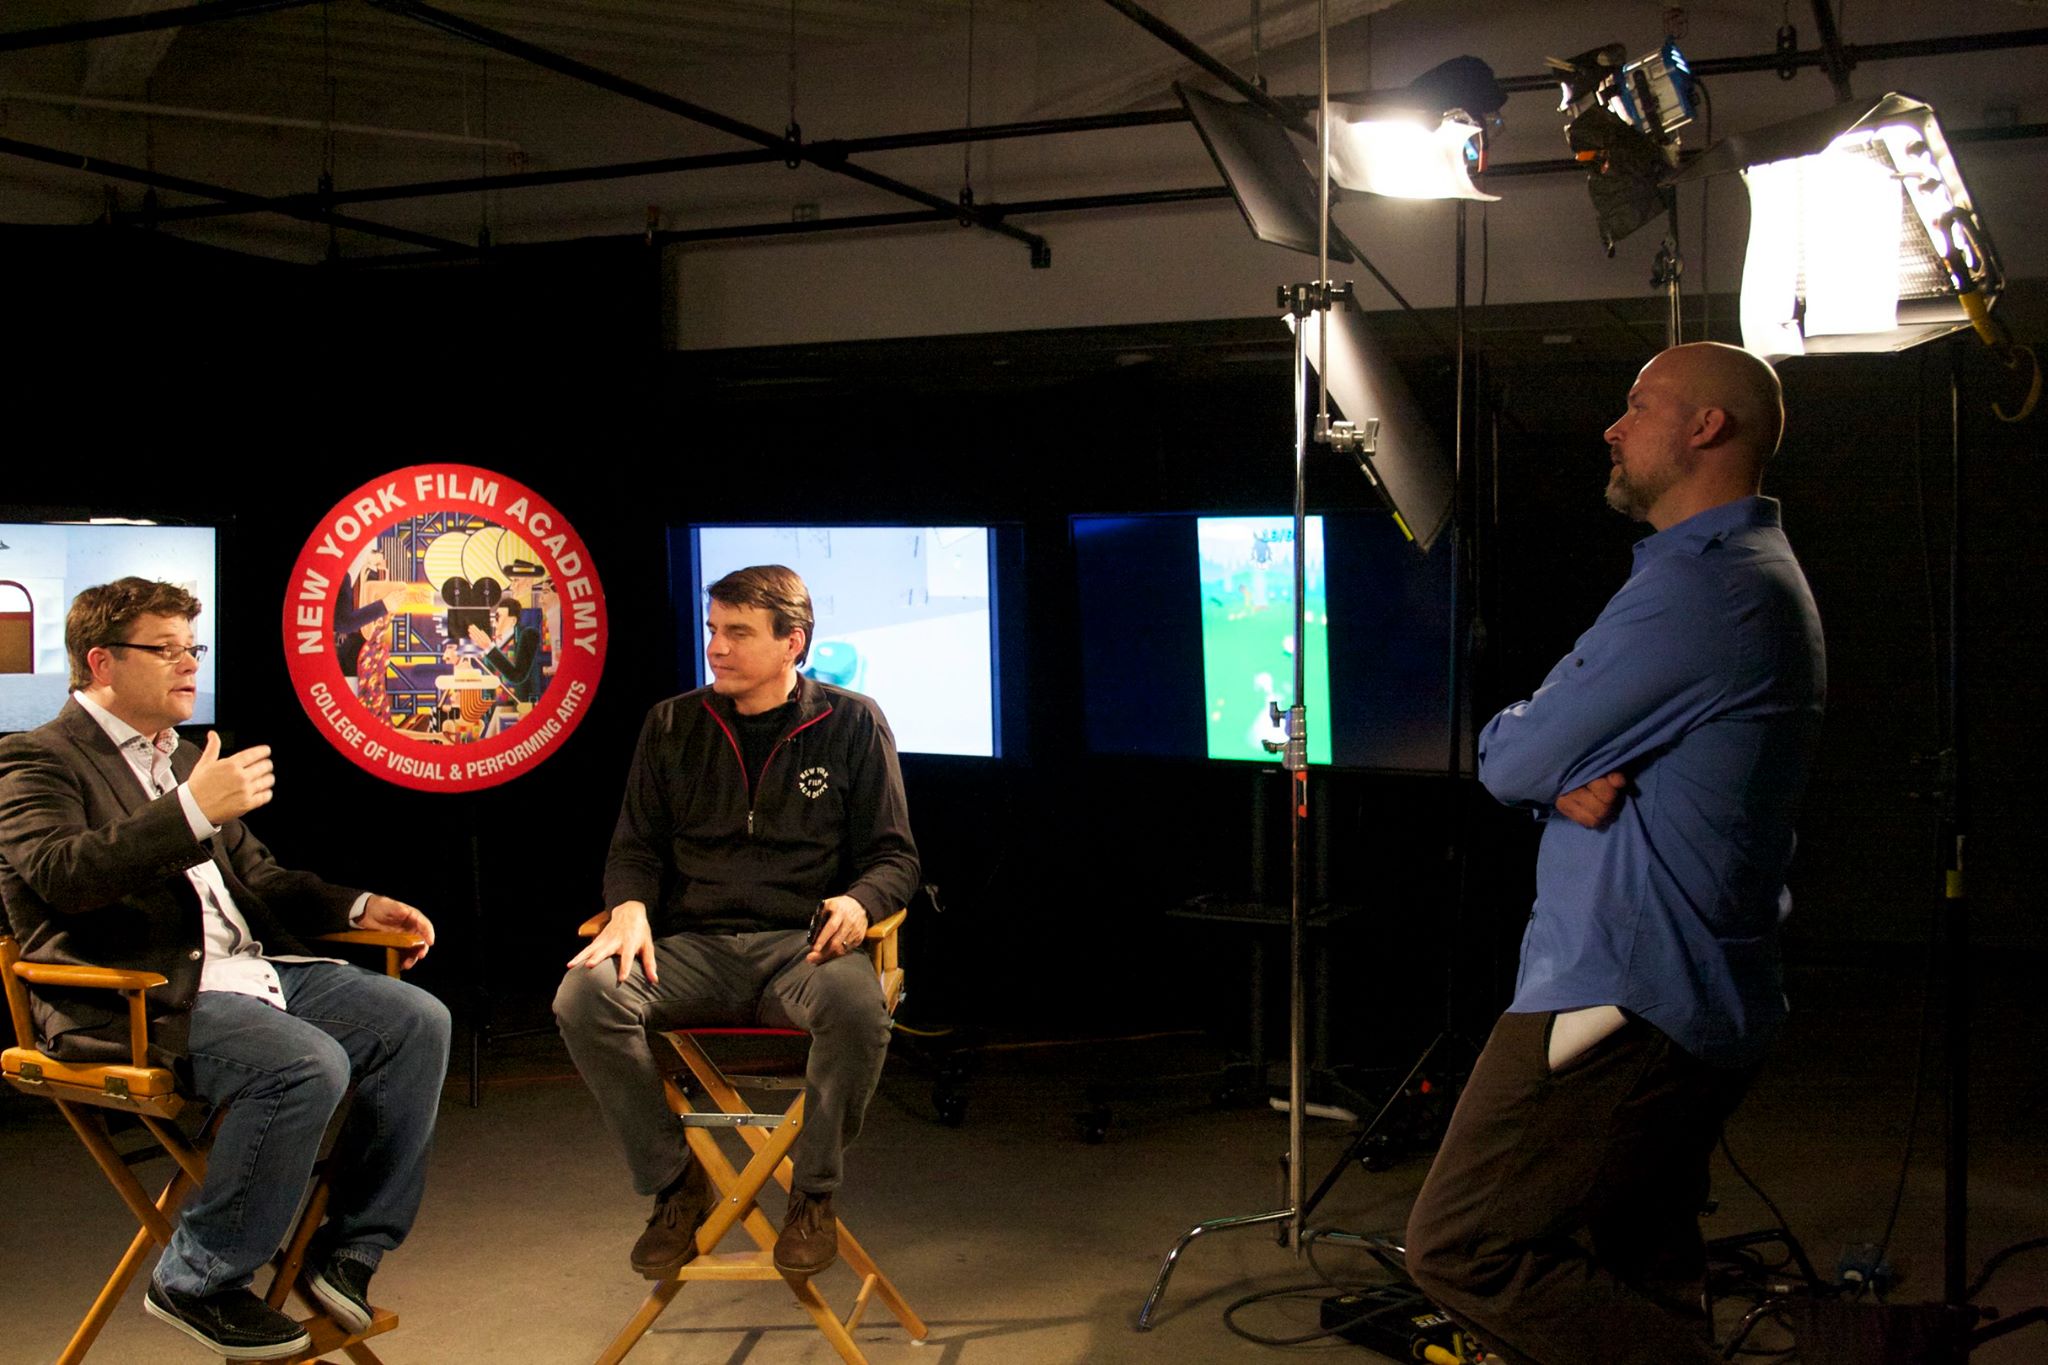 Host Sean Astin discussing Education in Gaming with Director Jeremy Snead